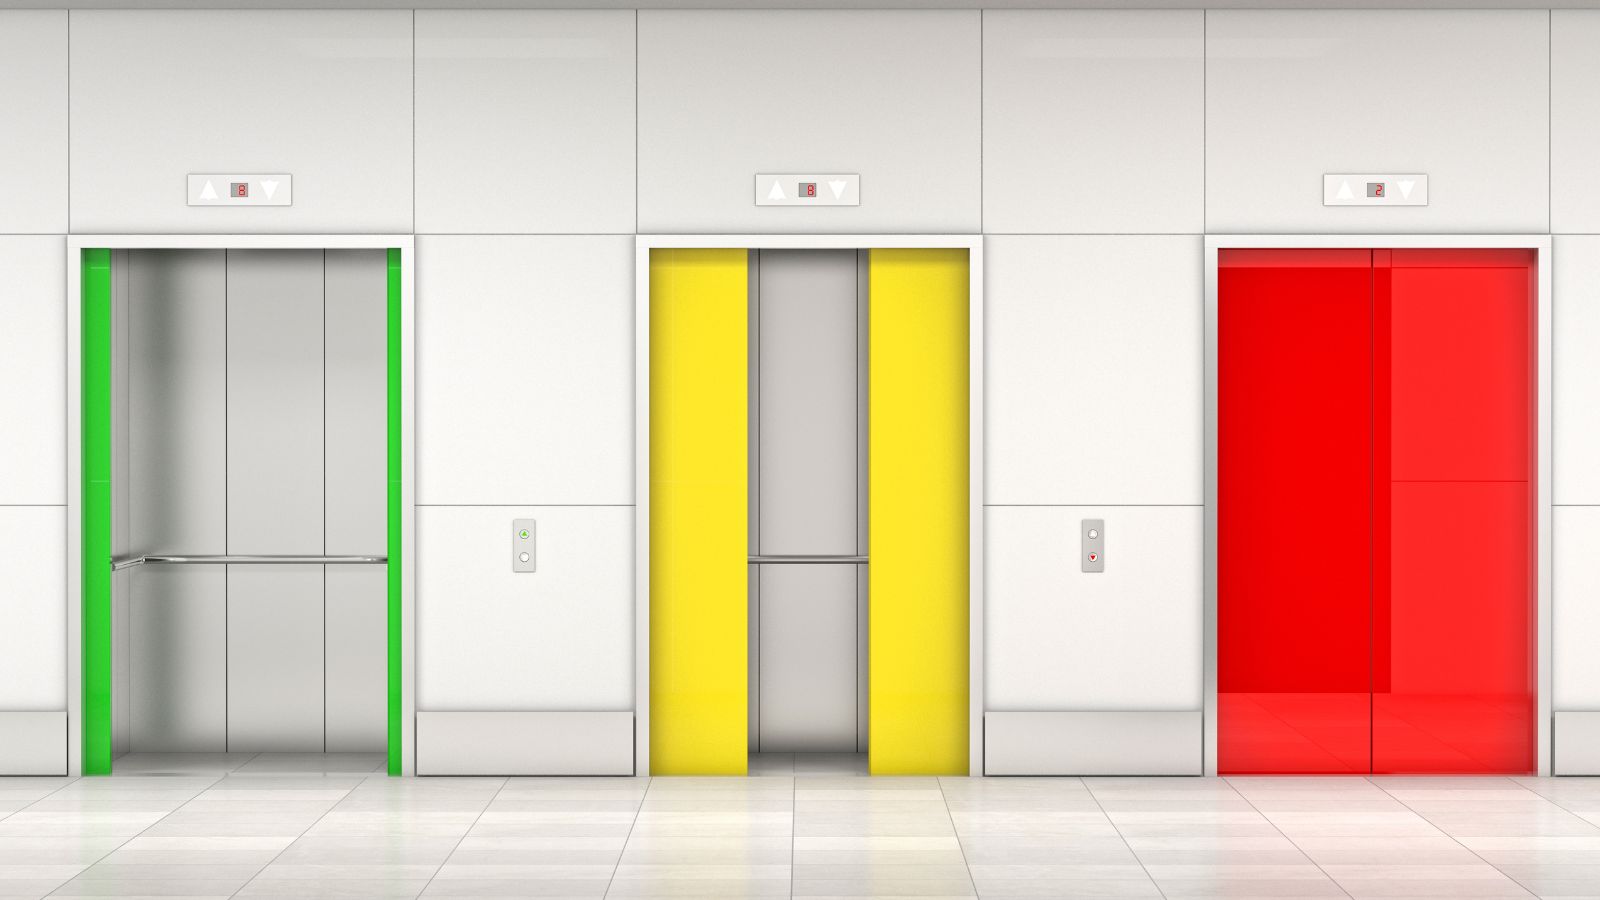 A row of 3 lift doors, the one on the left is green and fully open, the middle door is yellow and partially-open, the right door is red and closed.